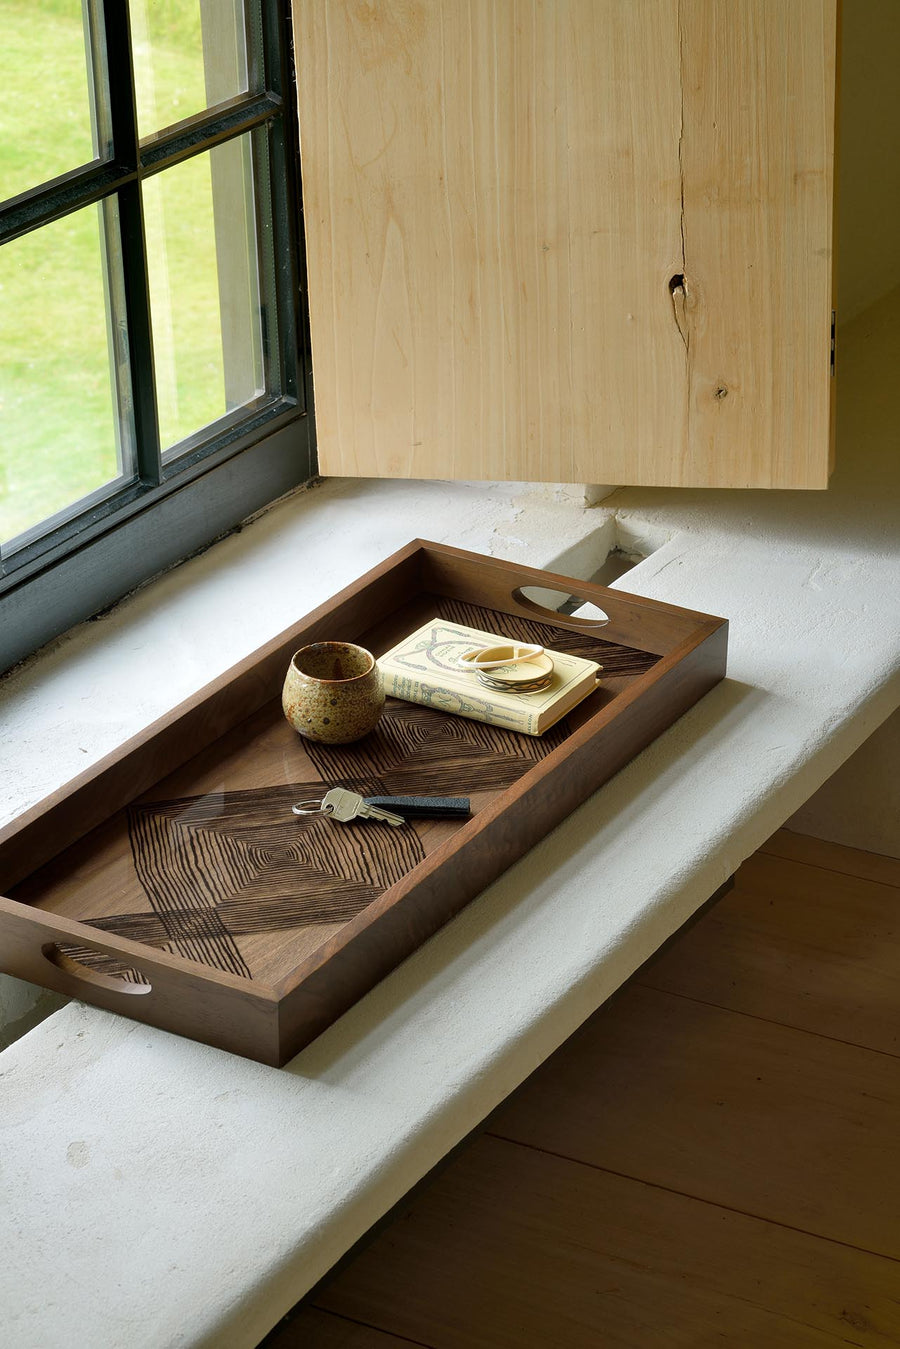 Walnut Linear Squares Glass Tray - Rectangle